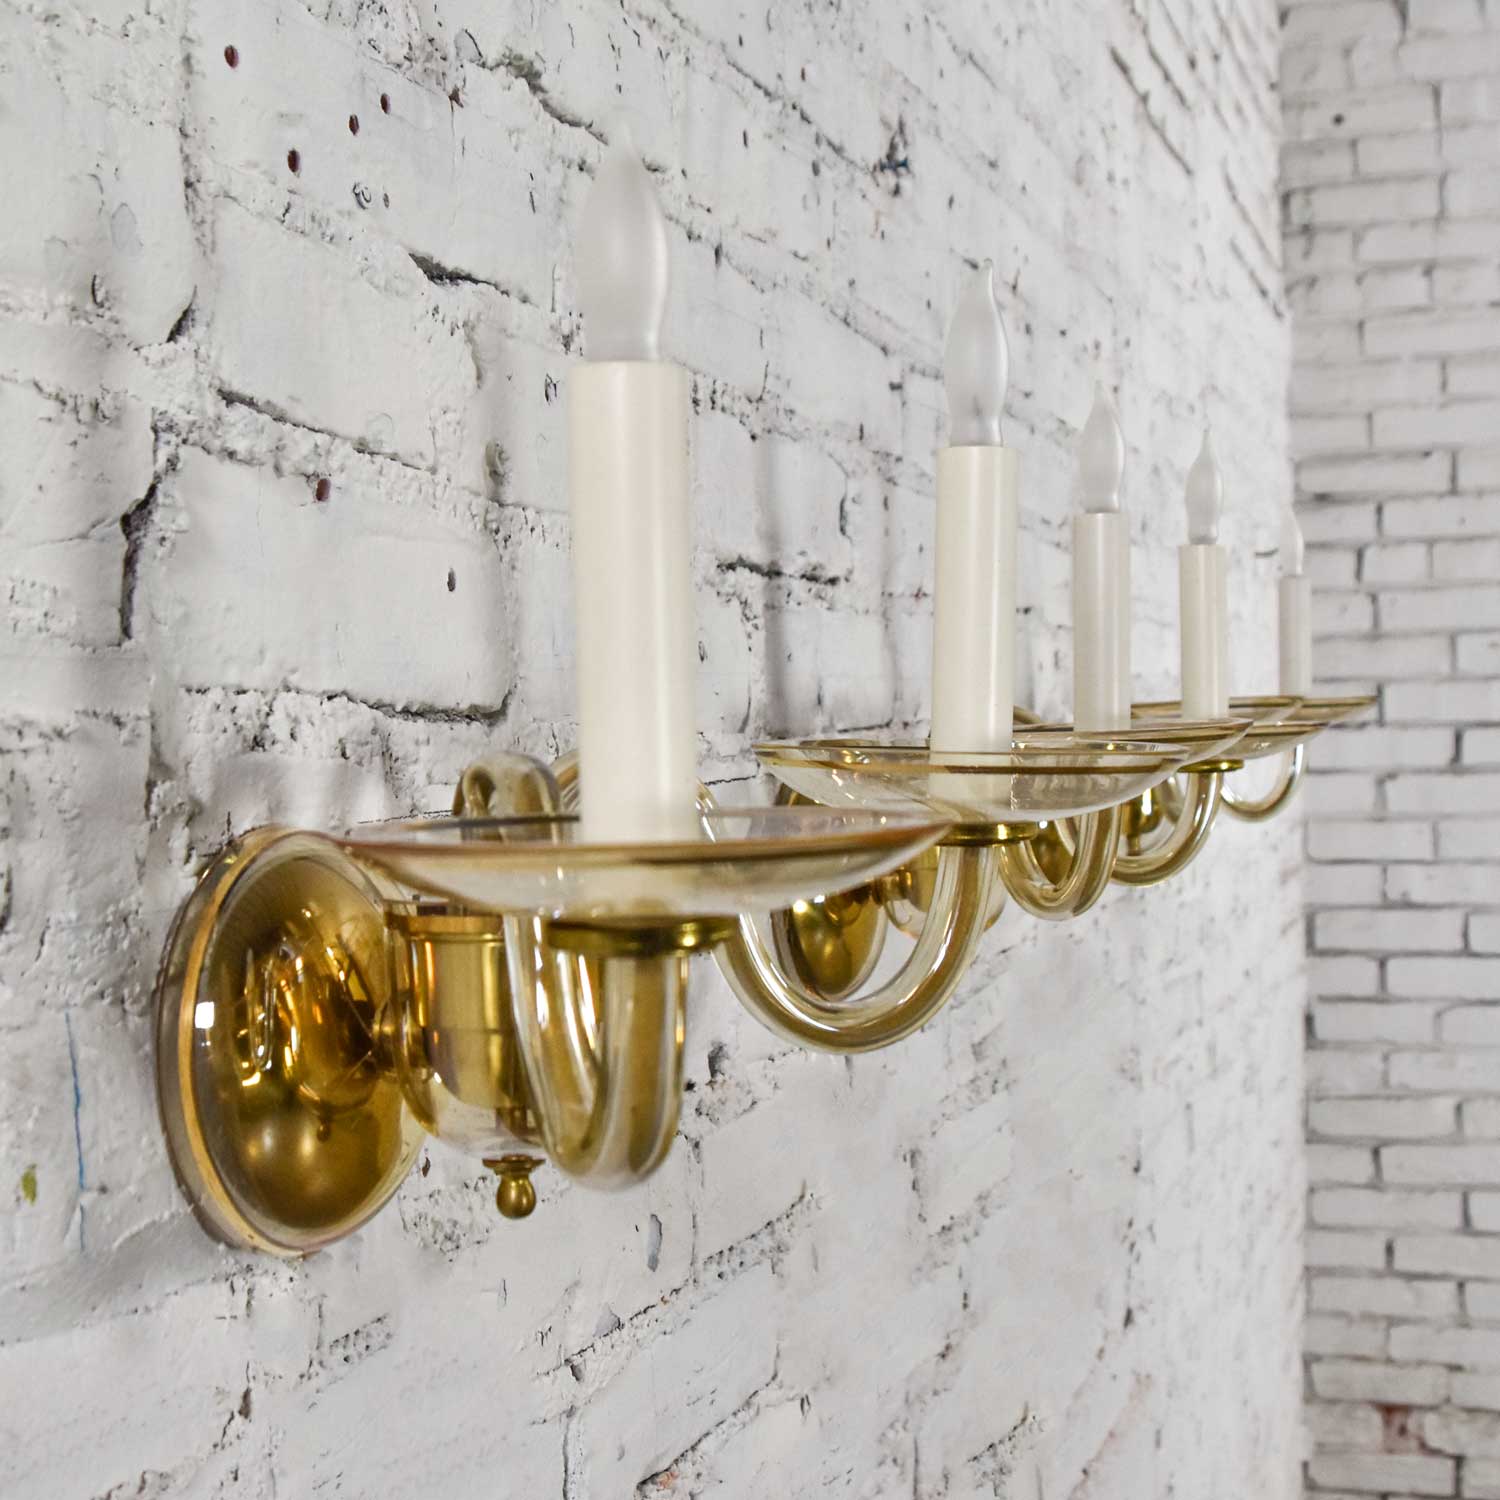 Czech Bohemian Blown Glass and Brass 12 Arm Chandelier & 3 Wall Sconces Mid 20th Century